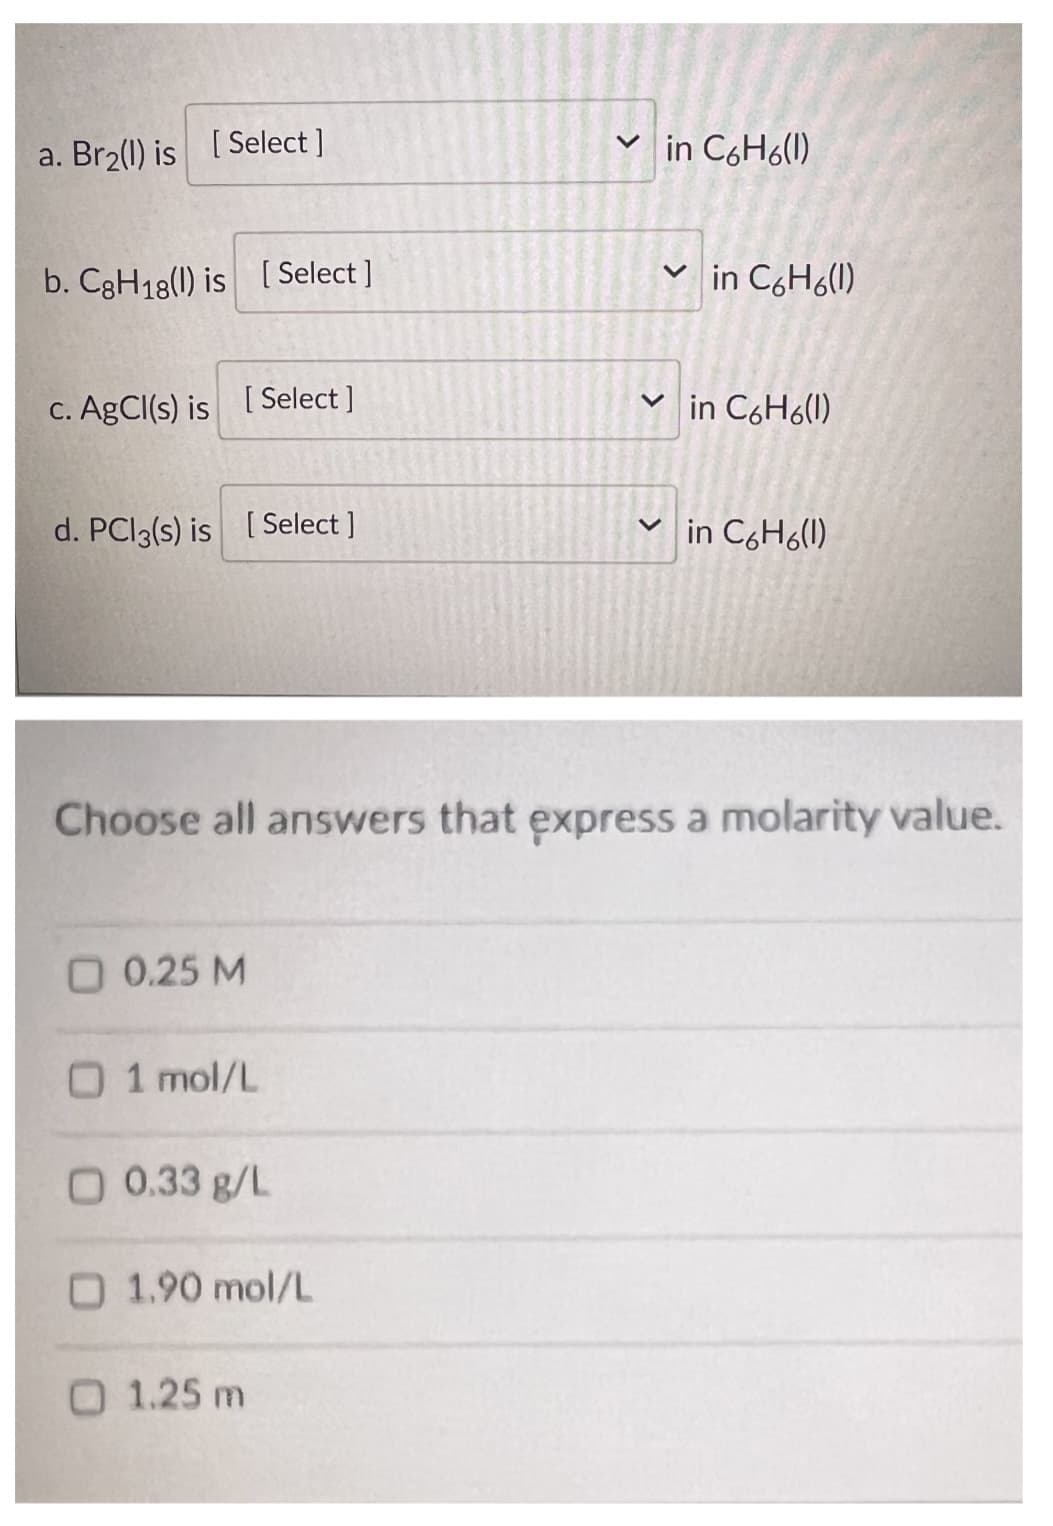 a. Br₂(l) is [Select ]
b. C8H18(l) is [Select]
c. AgCl(s) is [Select]
d. PC13(s) is [Select ]
O 0.25 M
1 mol/L
O 0.33 g/L
Choose all answers that express a molarity value.
1.90 mol/L
✓in C6H6(1)
1.25 m
✓in C6H6(1)
✓in C6H6(1)
✓in C6H6(1)